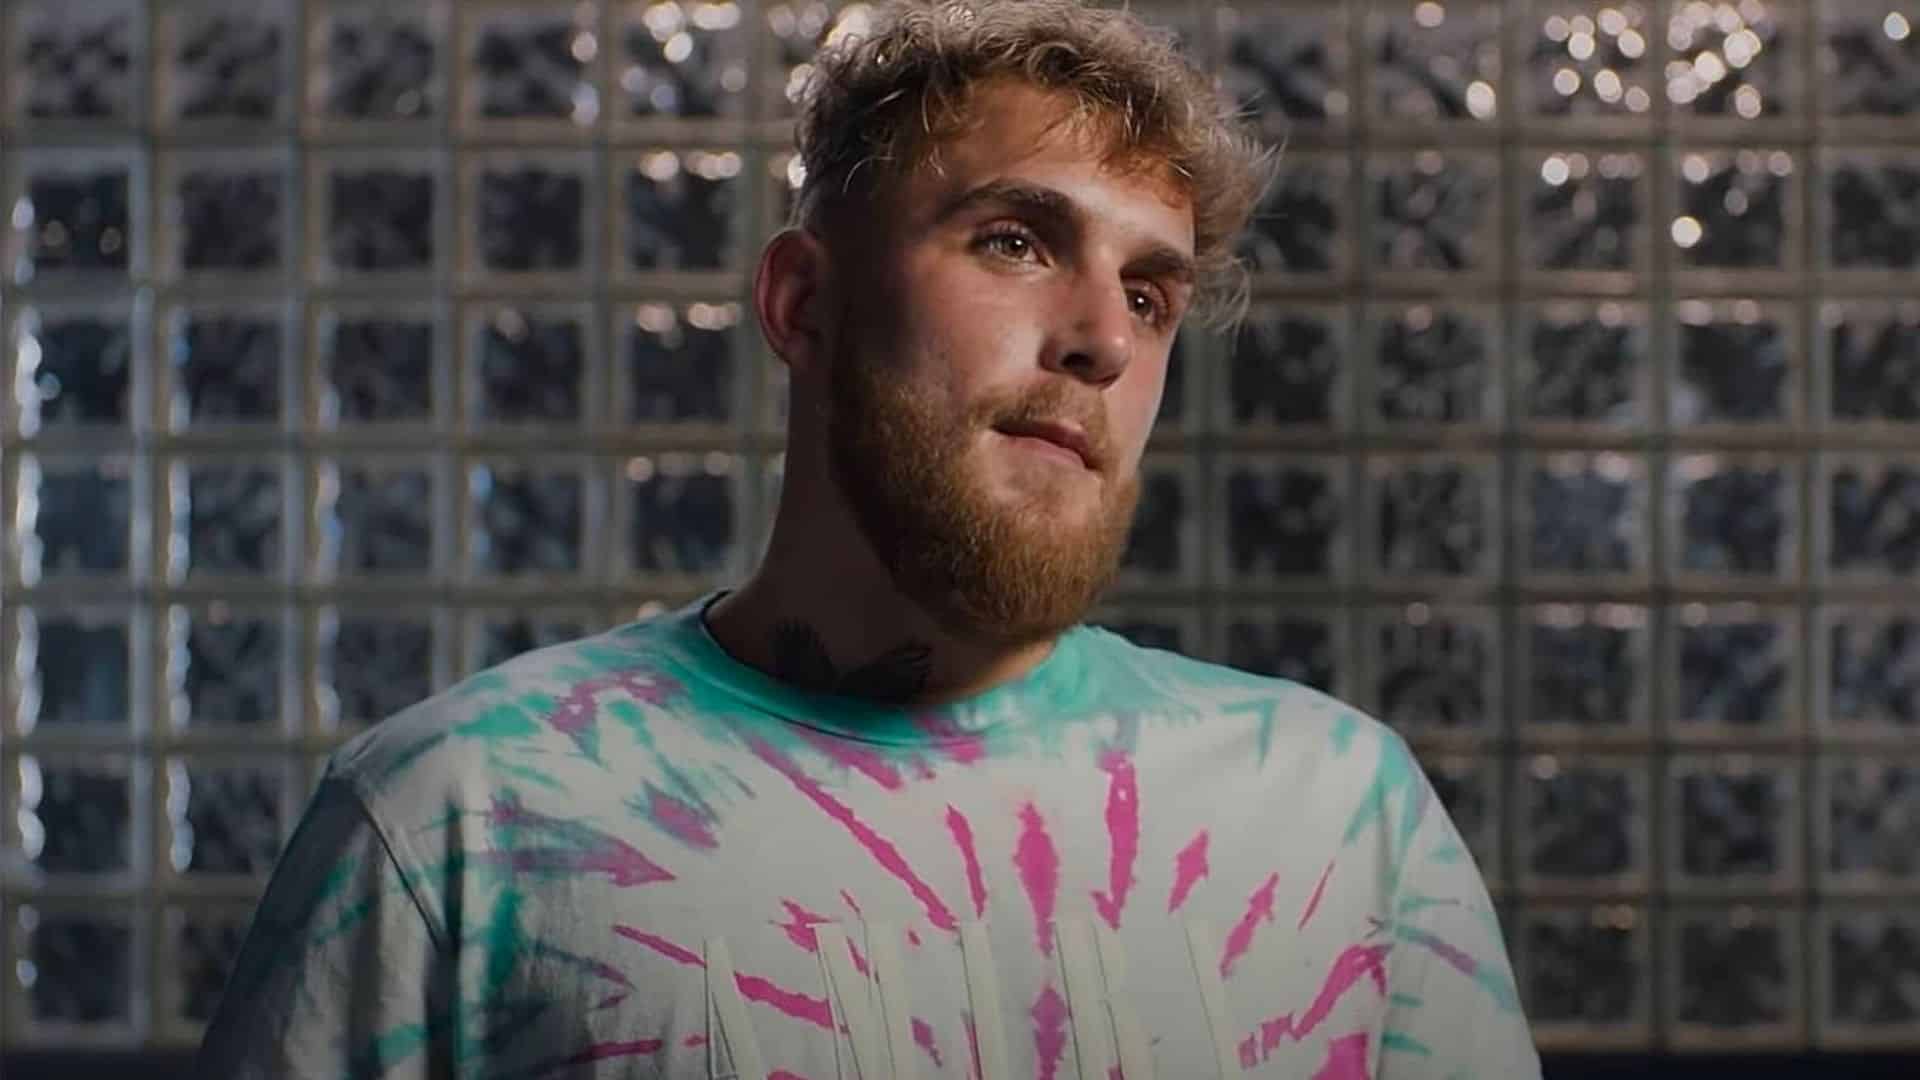 Jake Paul talking to camera with glass wall in background